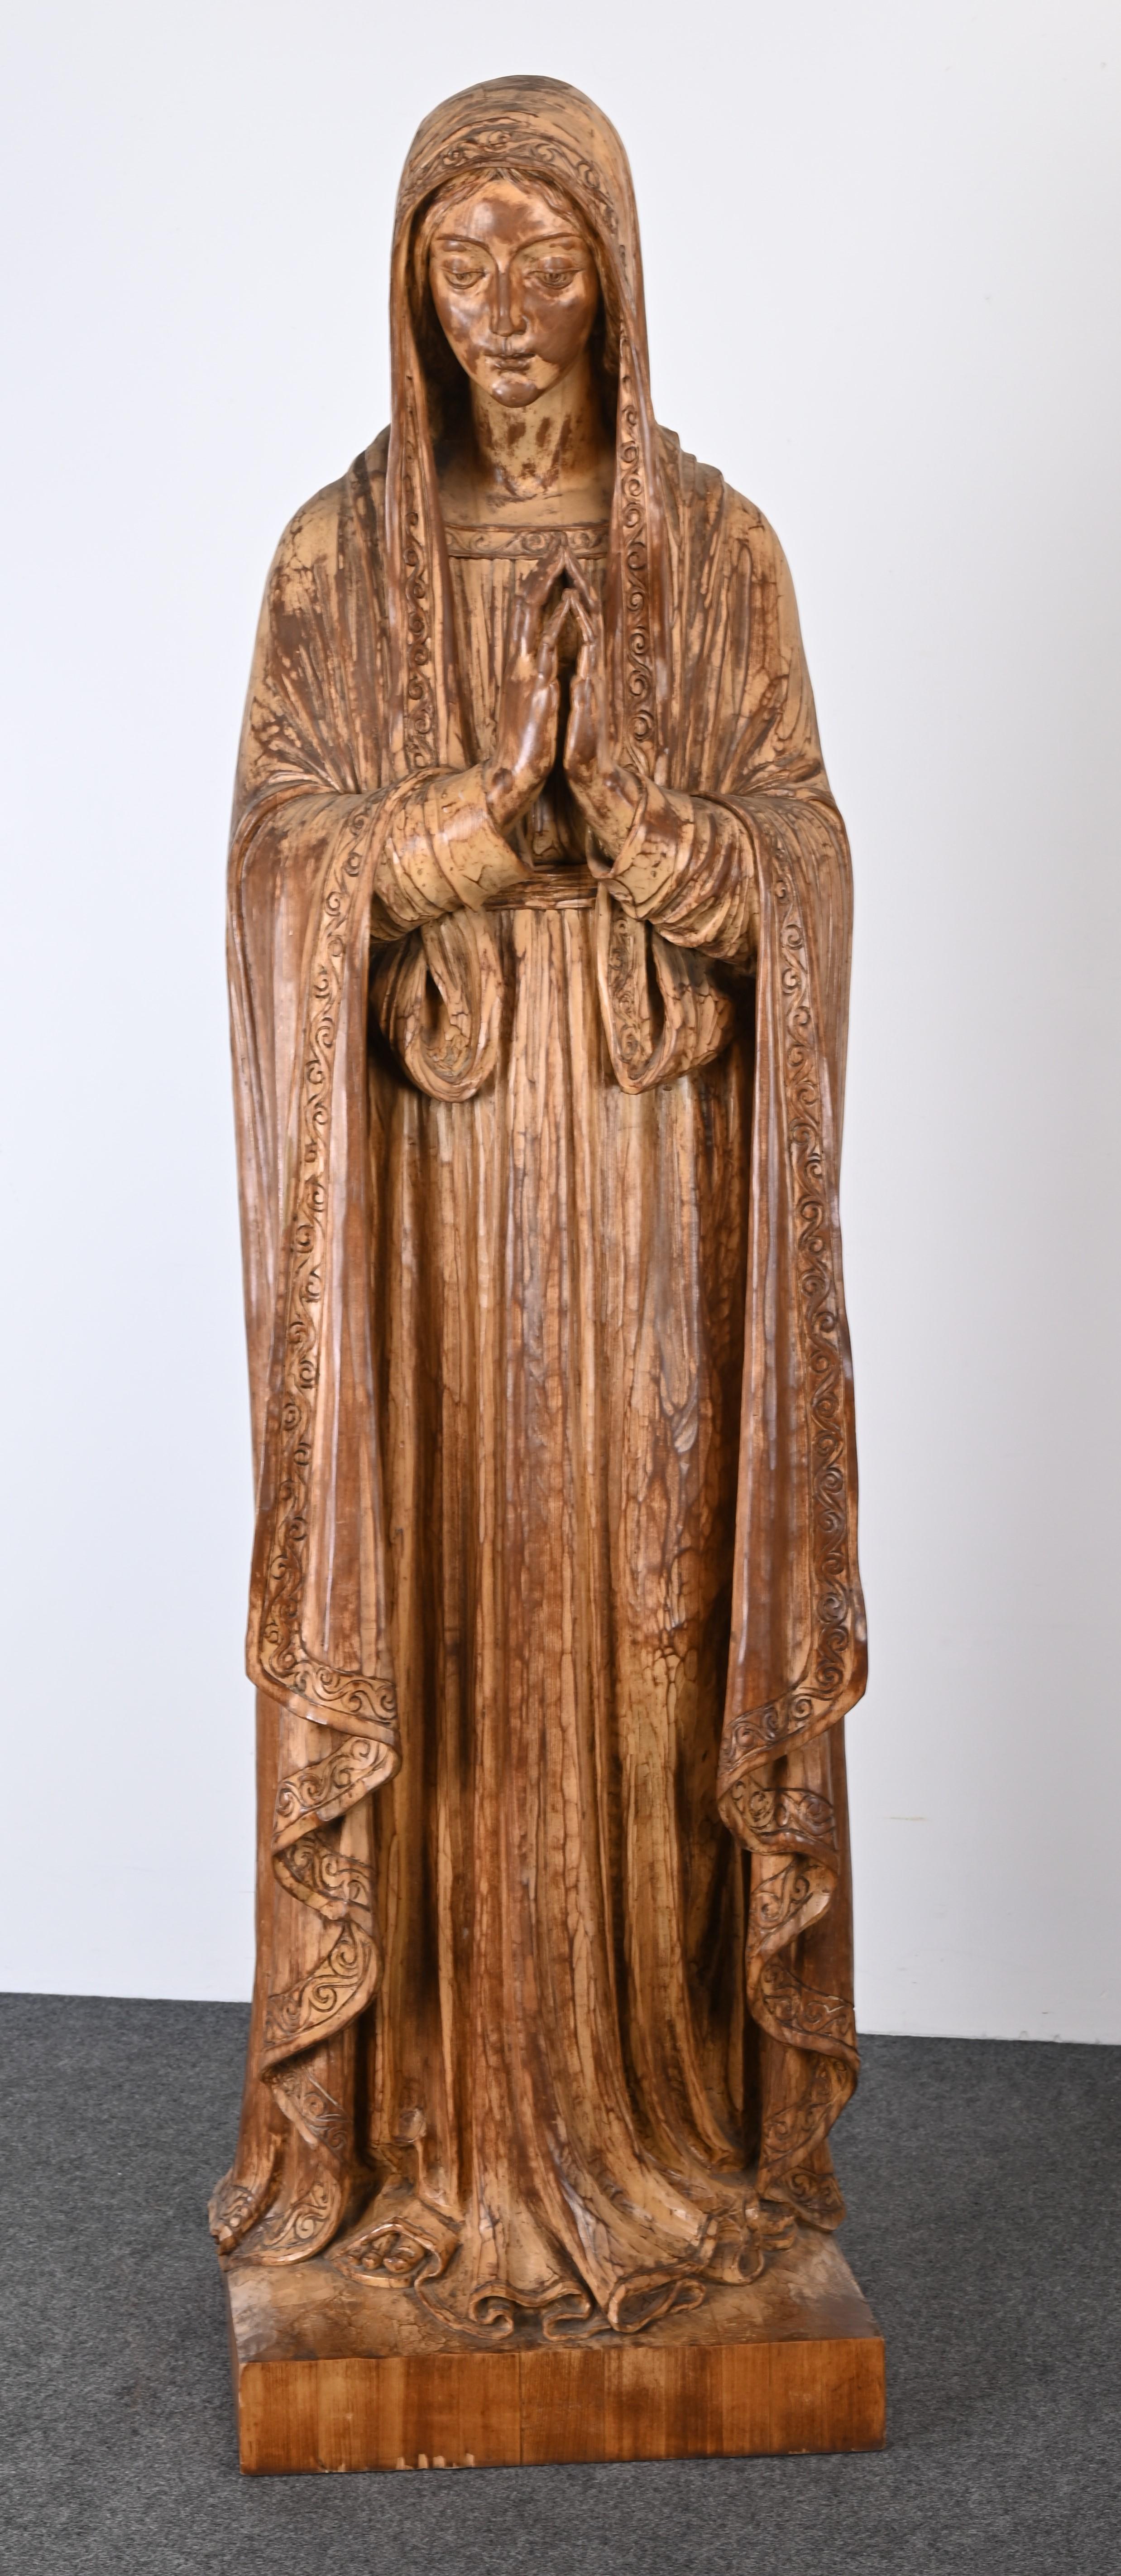 A religious pair of monumental wooden sculptures depicting Jesus and Mary from the Berks County Pennsylvania Jesuit Center. This dynamic hand-carved pair of folk art statutes were probably commissioned specially for the Jesuit Center. Carved with an